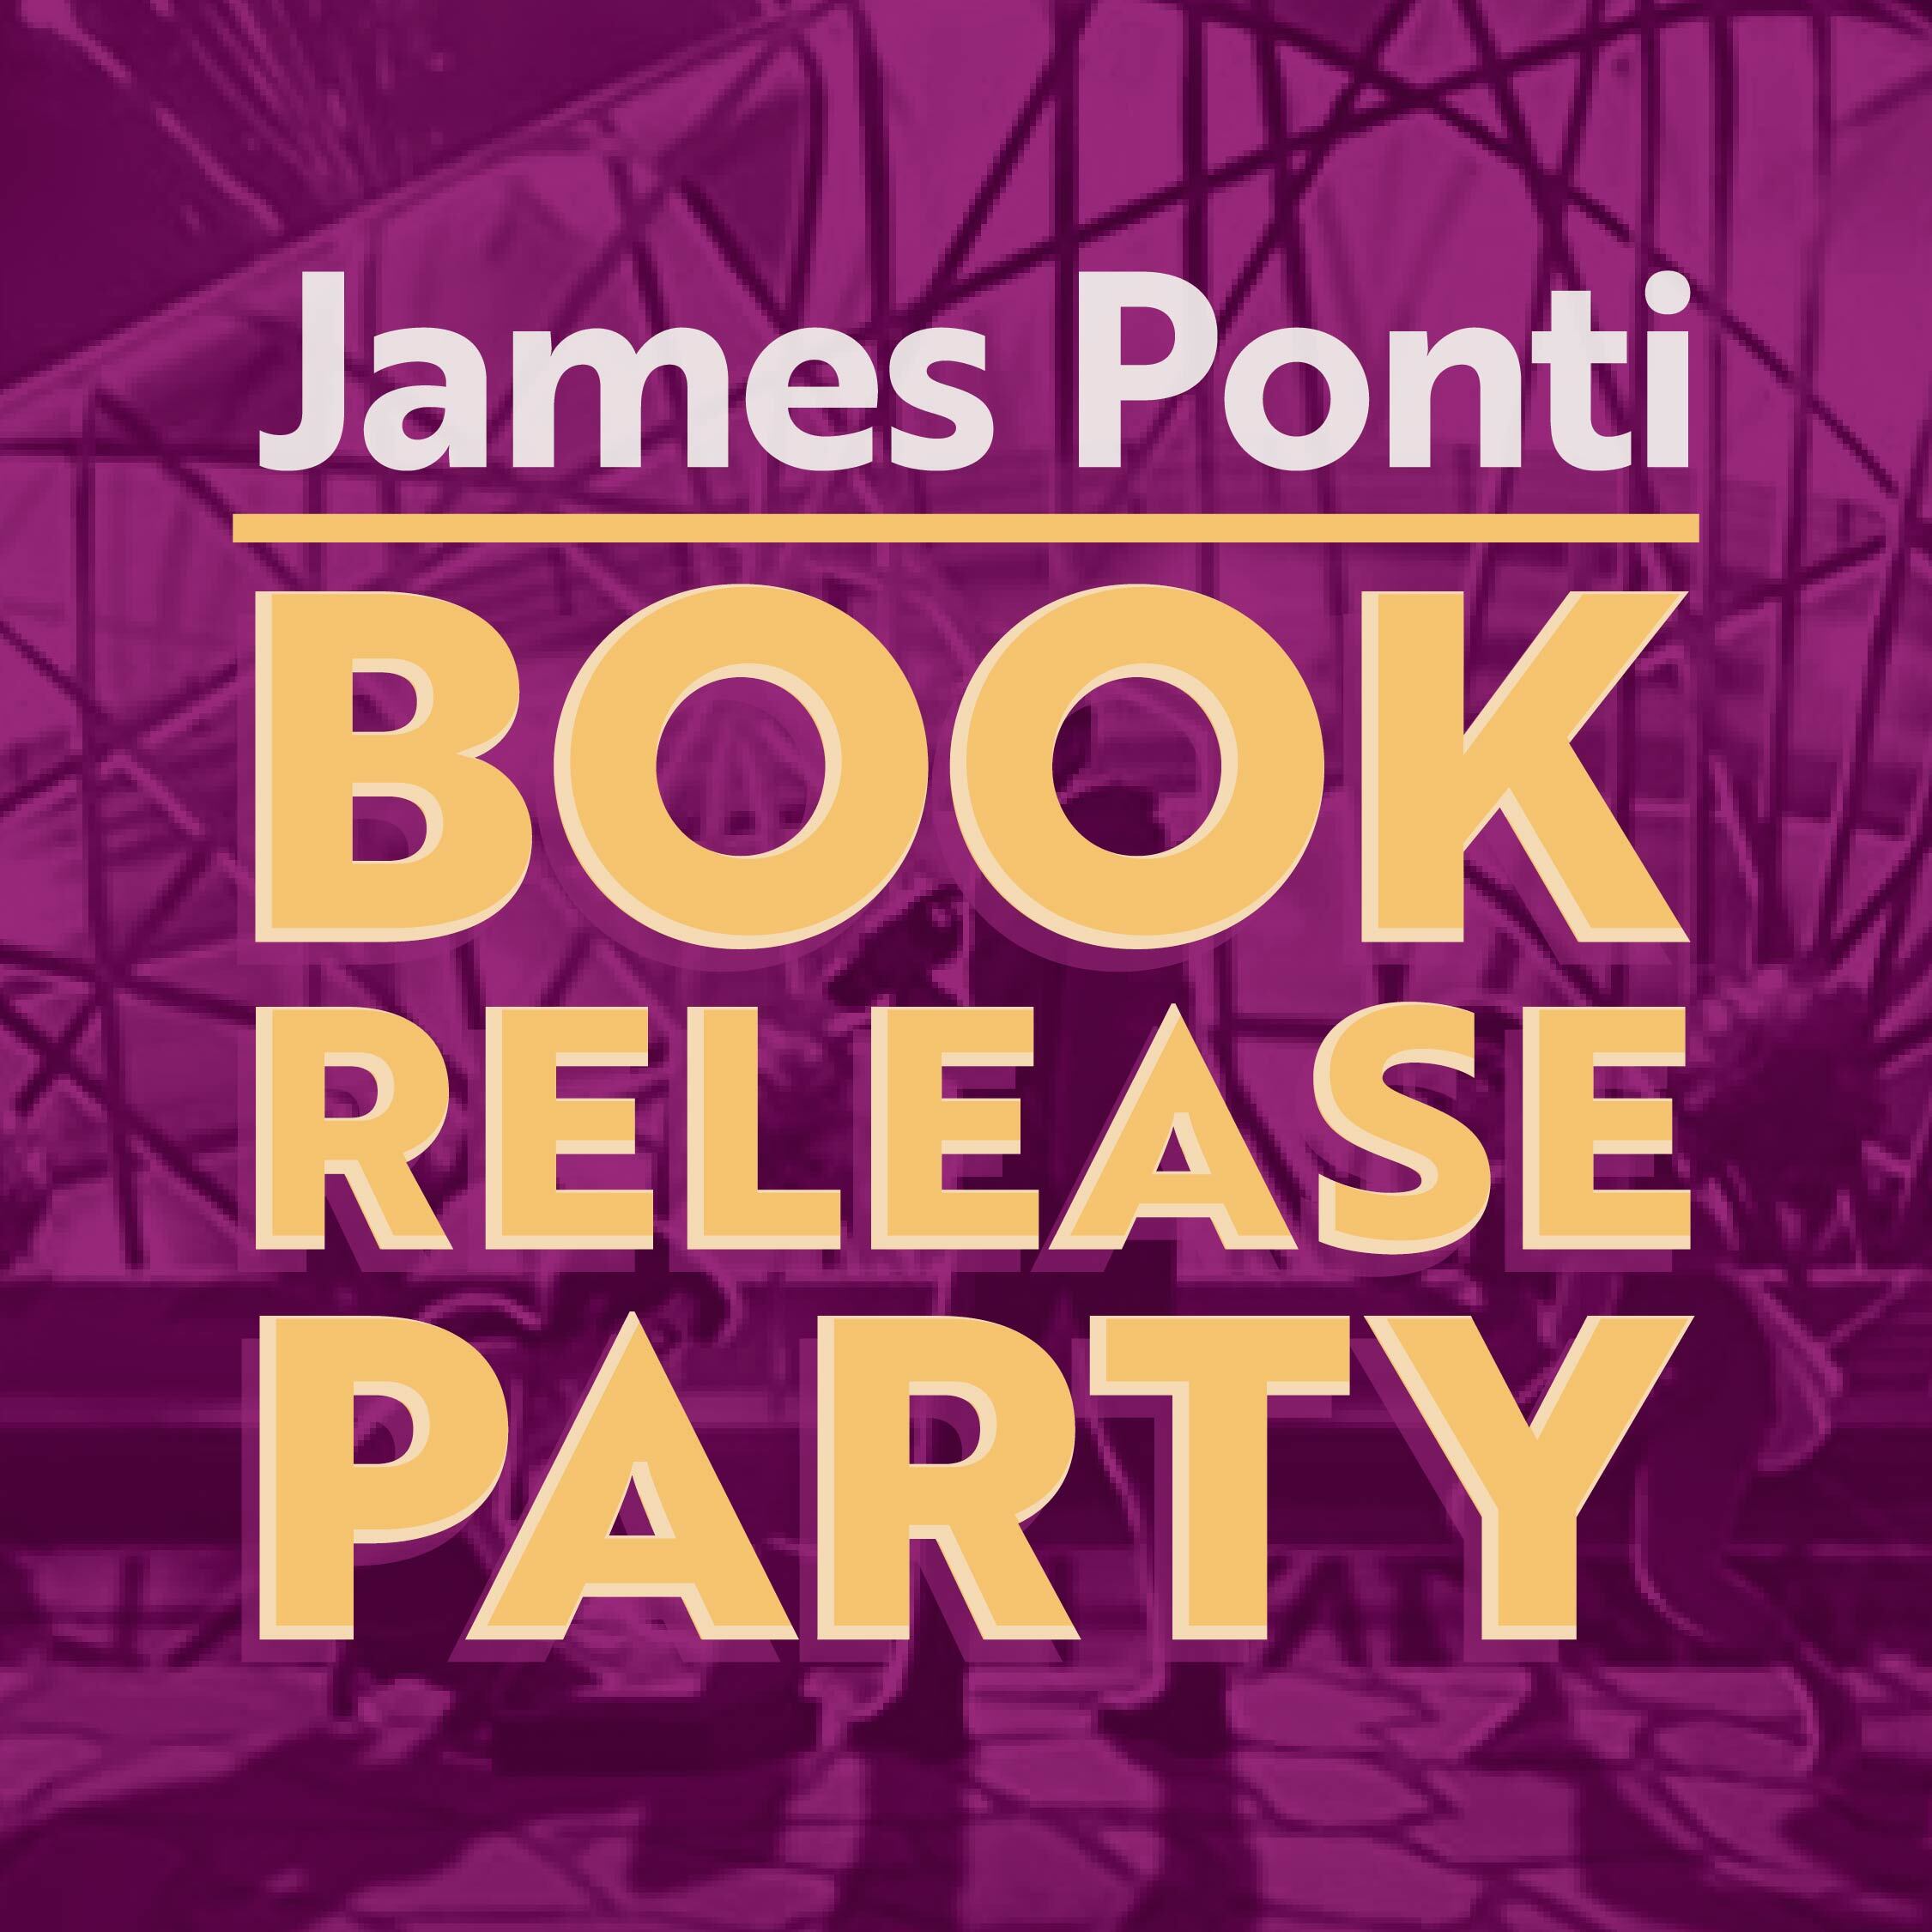 James Ponti Book Release Party graphic